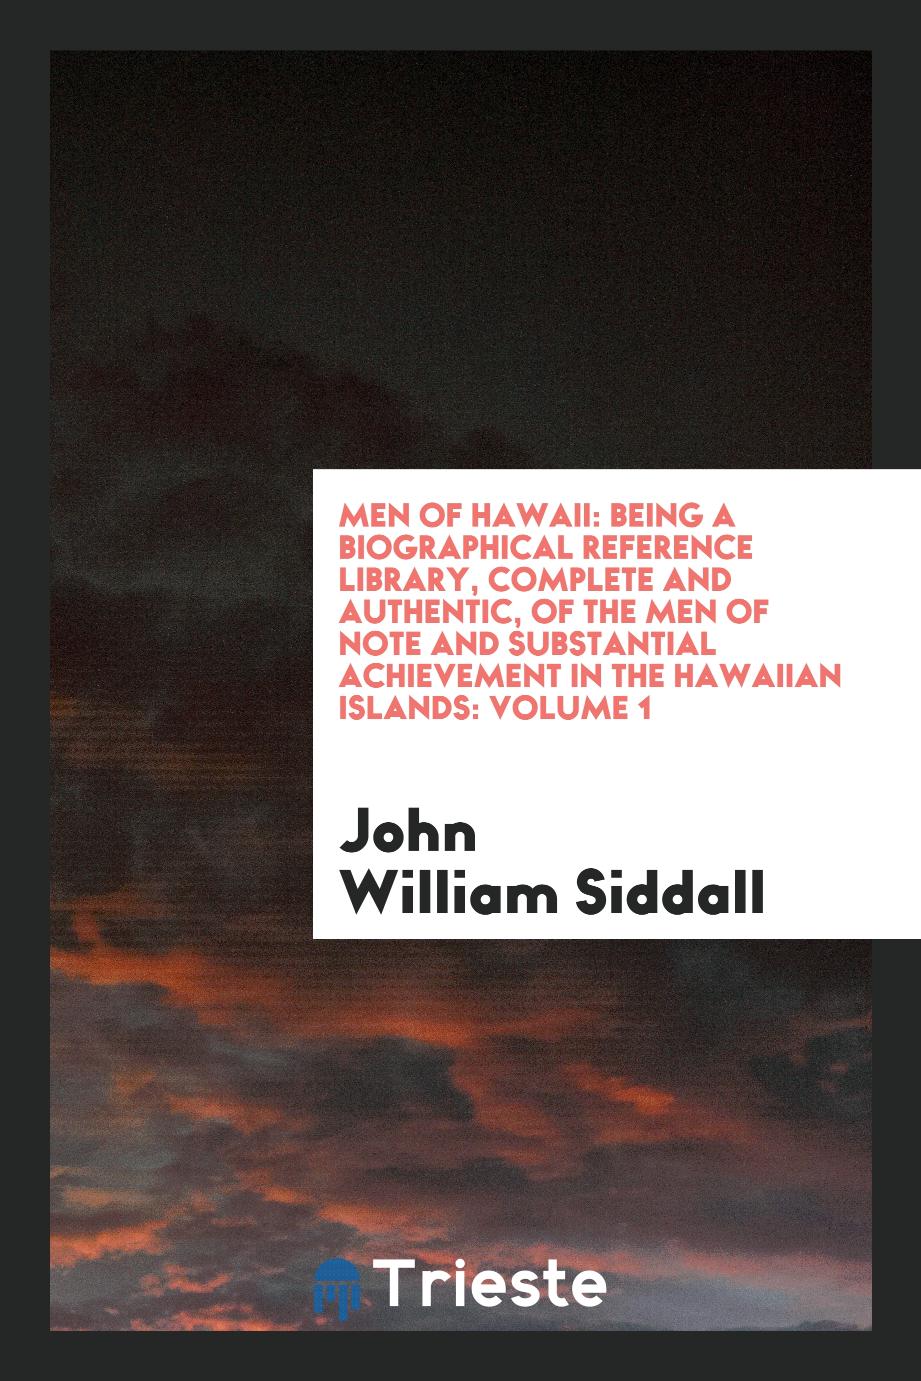 Men of Hawaii: Being a Biographical Reference Library, Complete and Authentic, of the Men of Note and Substantial Achievement in the Hawaiian Islands: Volume 1